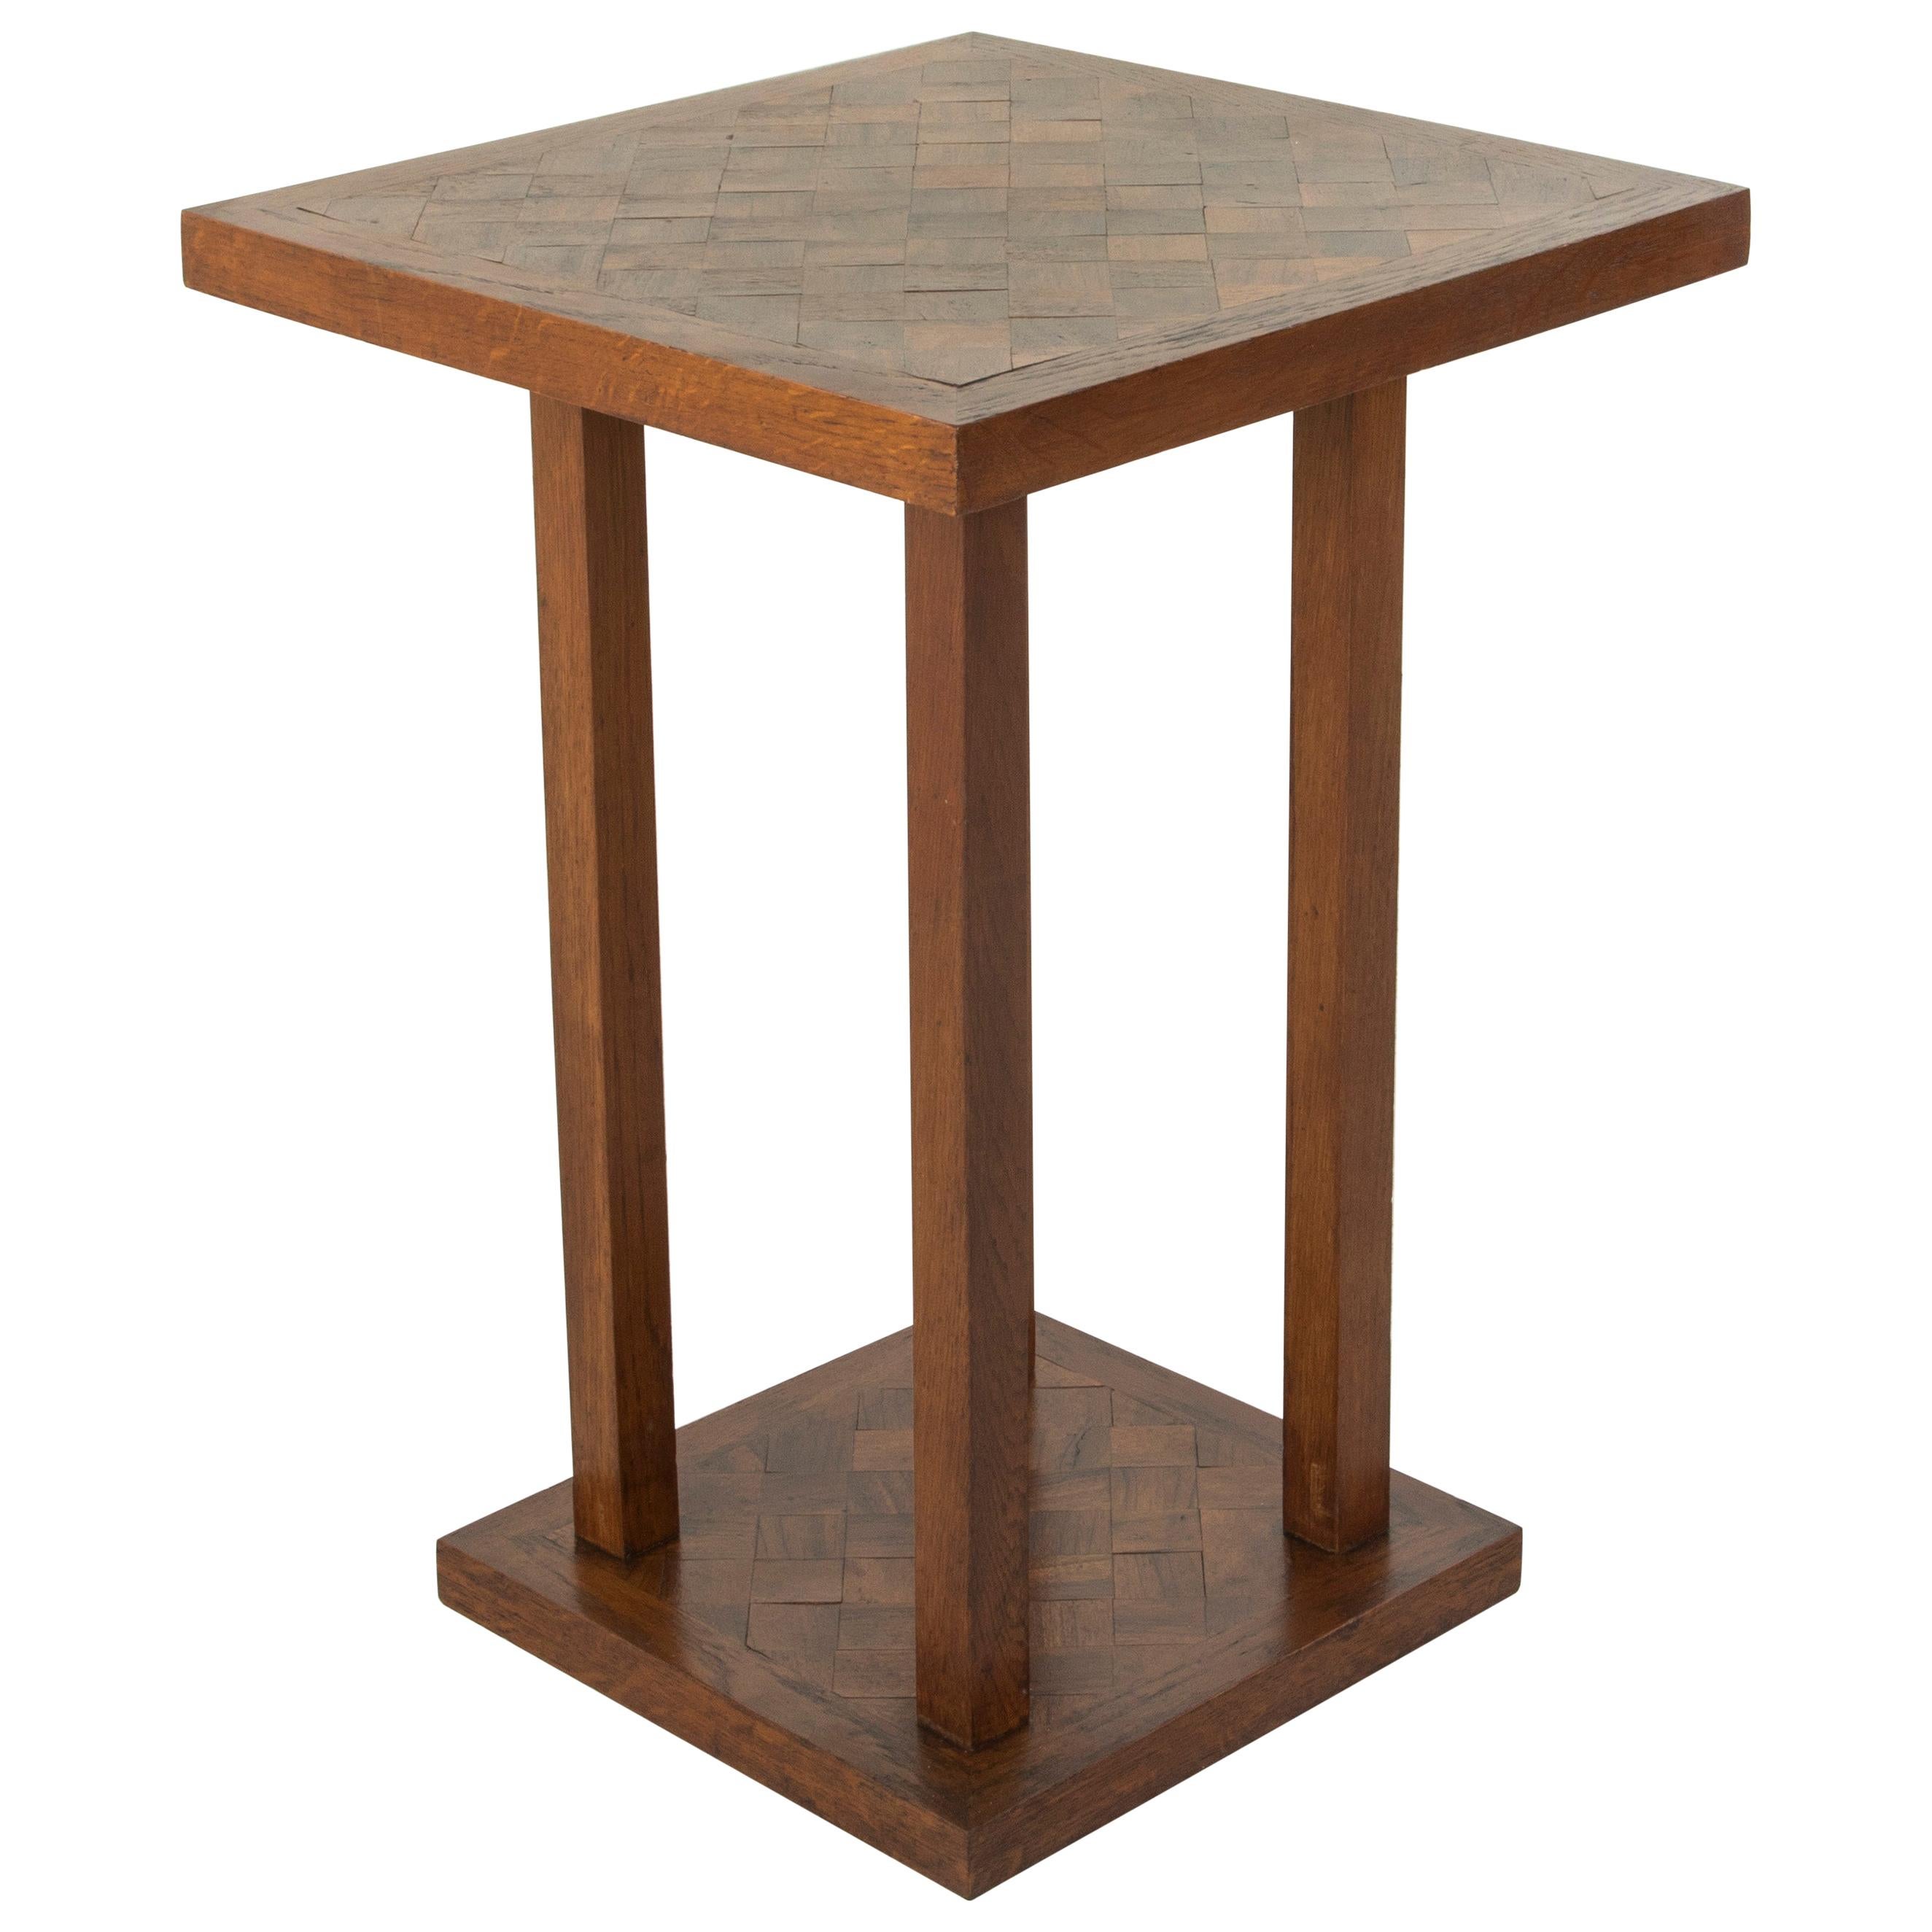 Mid-20th Century French Square Oak Marquetry Side Table or End Table